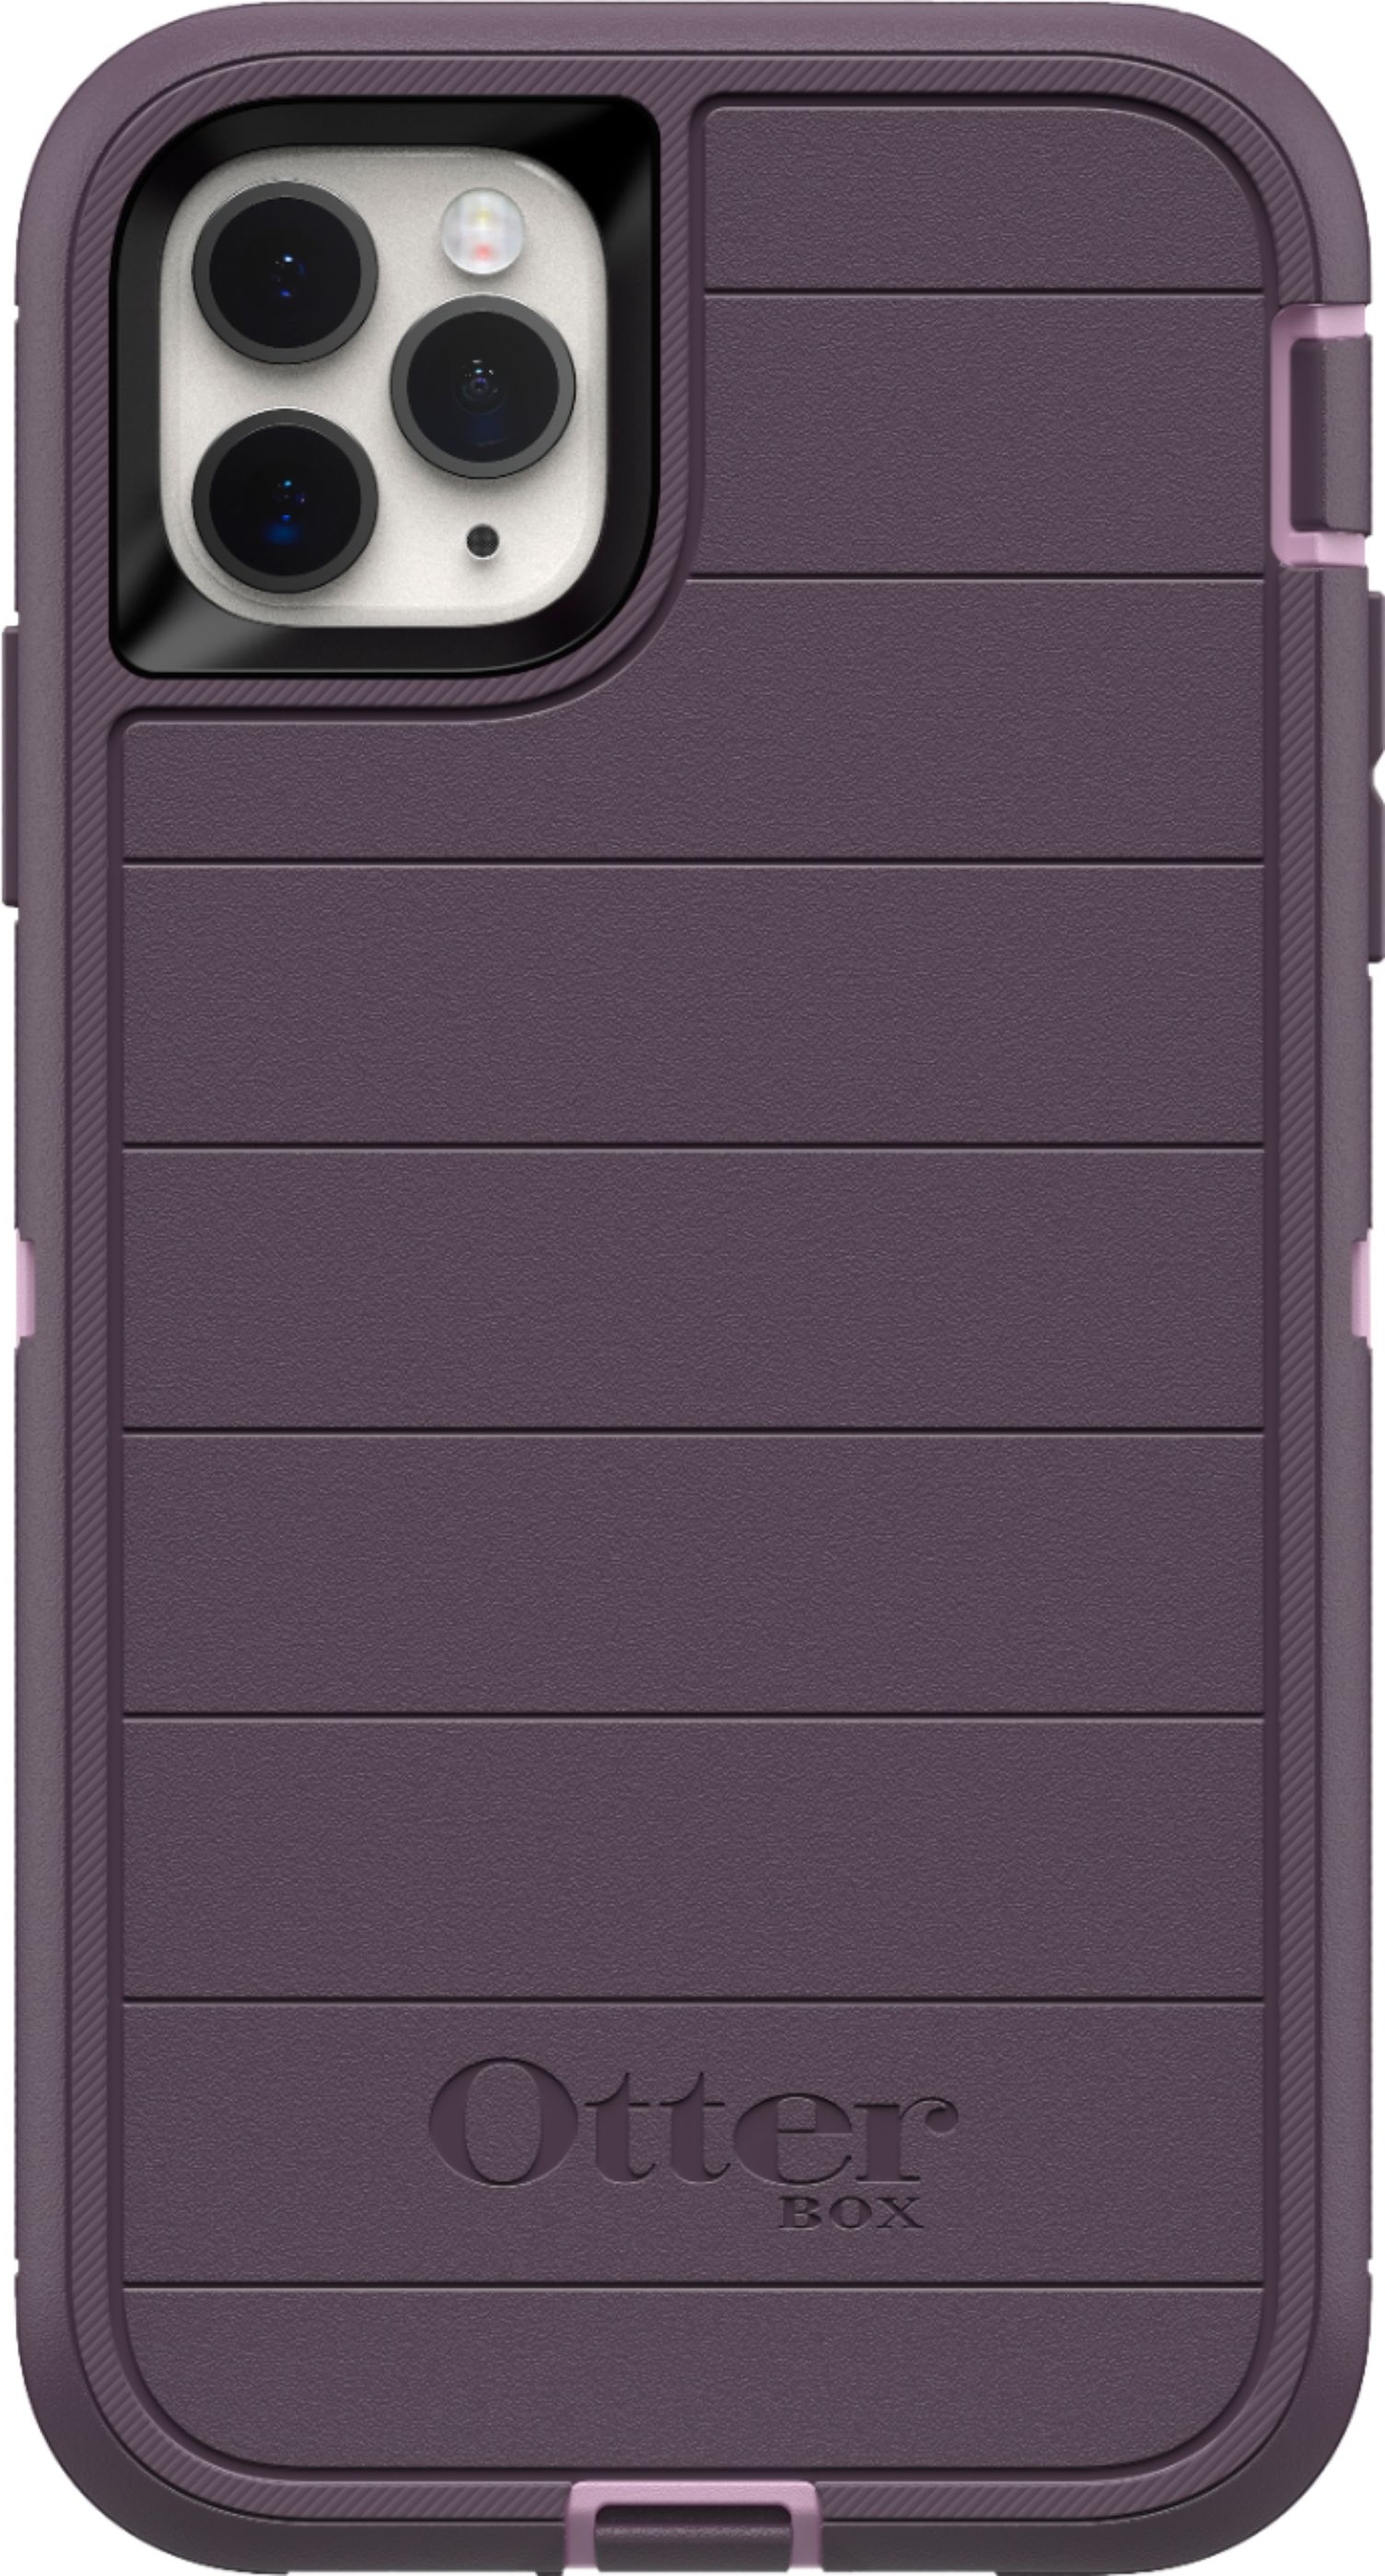 Otterbox Defender Pro Series Case For Apple Iphone 11 Pro Max